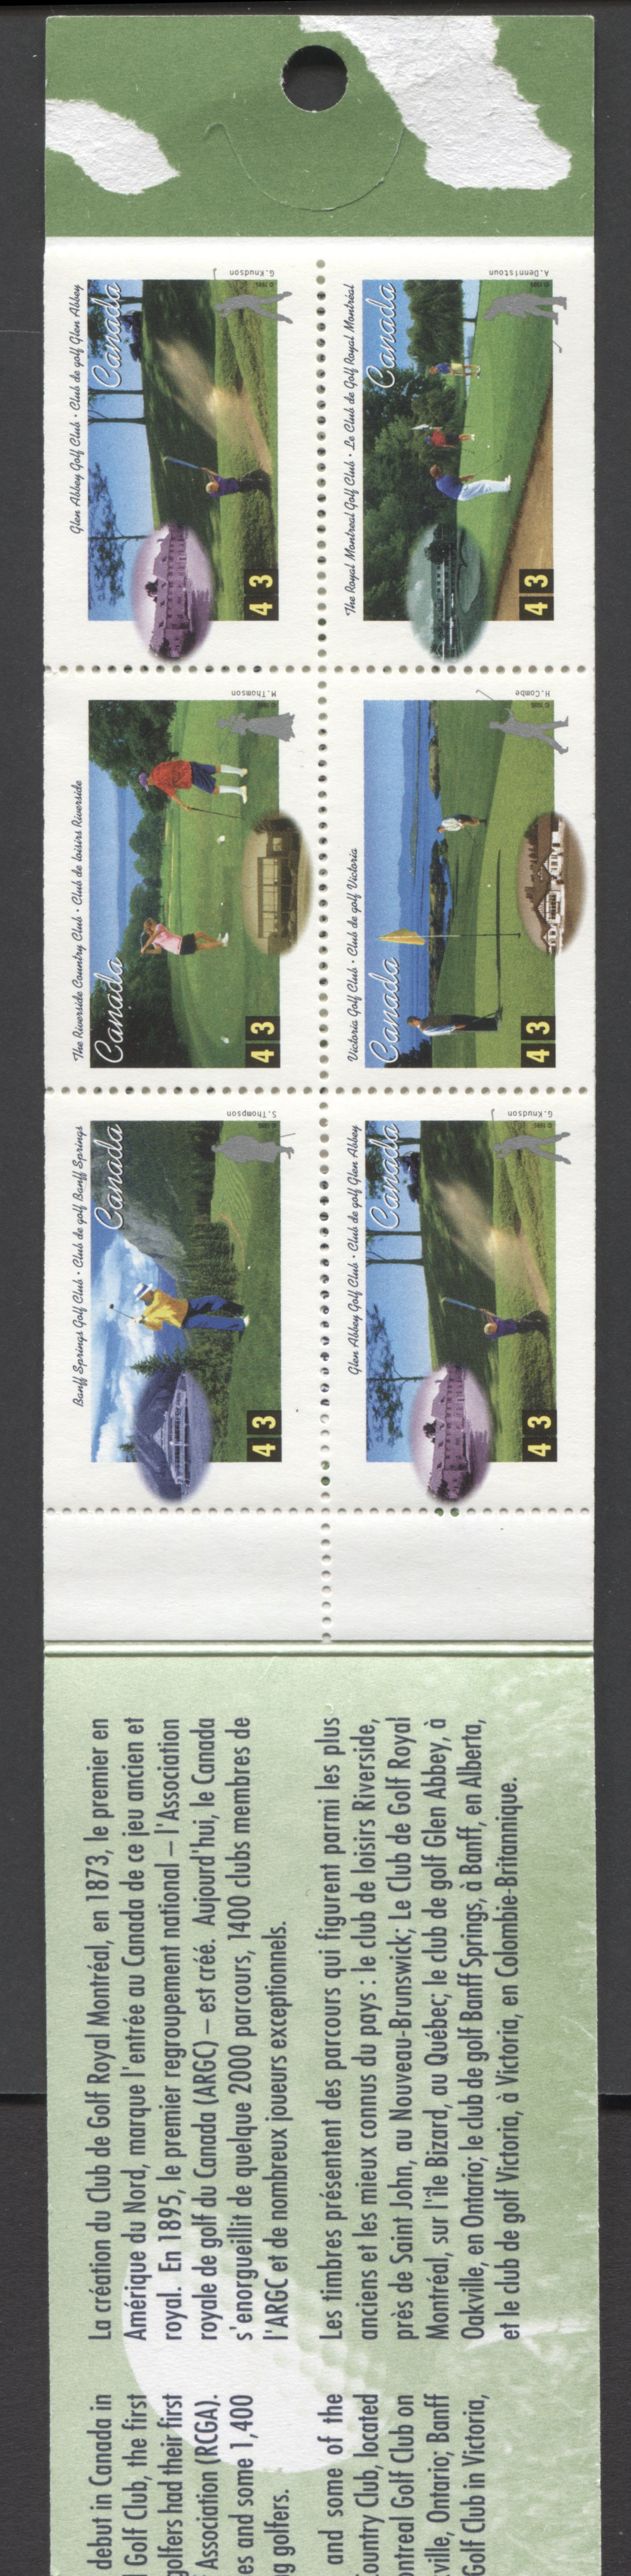 Canada #BK176a-b 1995 Golf in Canada Issue, Complete $4.30 Booklet, Coated Papers Paper, Dead Paper, 4 mm GT-4 Tagging